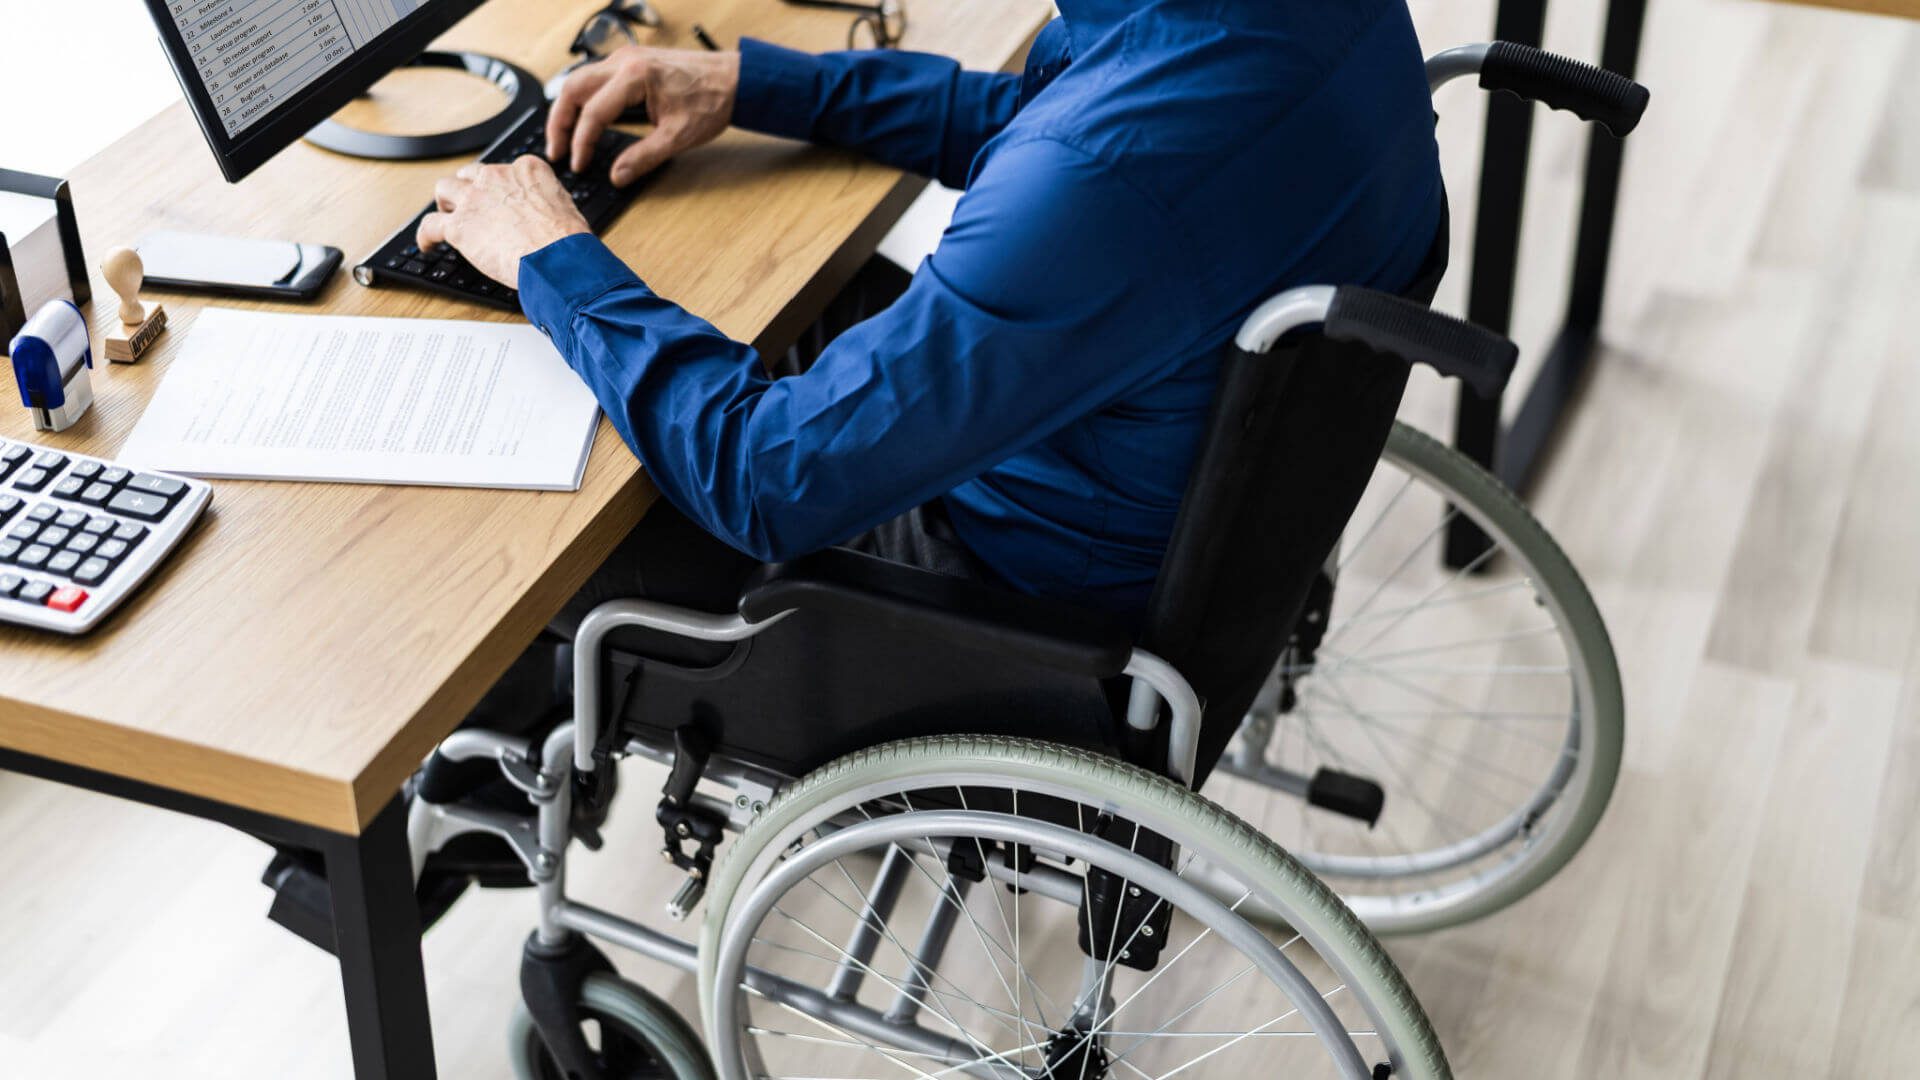 employee with disabilities asking for a reasonable accommodation